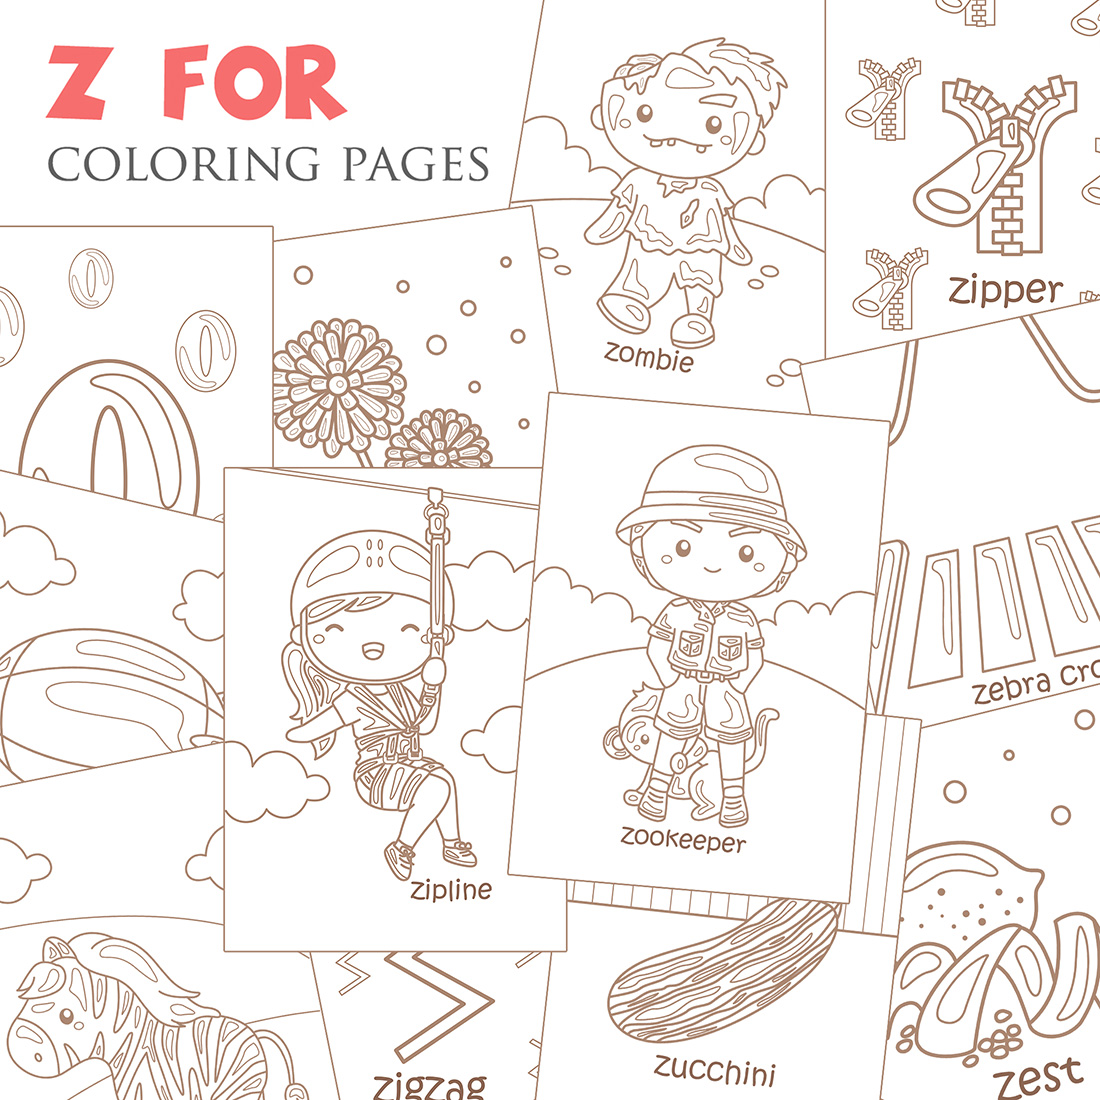 Alphabet Z For Vocabulary School Letter Reading Writing Font Study Learning Student Toodler Kids Lesson Zebra Cross Zinnia Zucchini Zipline Zero Zigzag Zeppelin Zookeeper Zest Zombie Zipper Z Cartoon Coloring for Kids and Adult cover image.